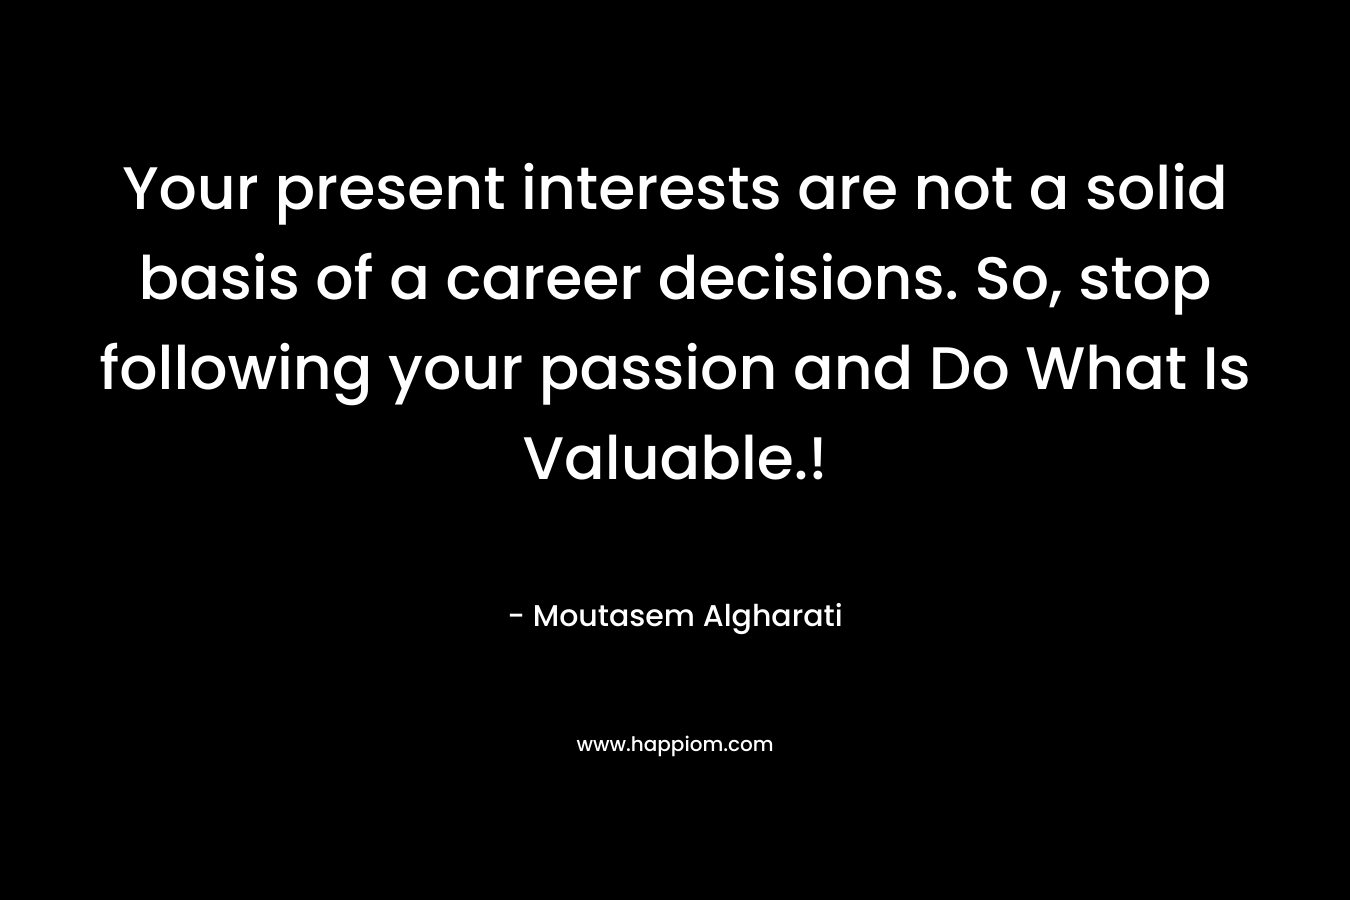 Your present interests are not a solid basis of a career decisions. So, stop following your passion and Do What Is Valuable.! – Moutasem Algharati